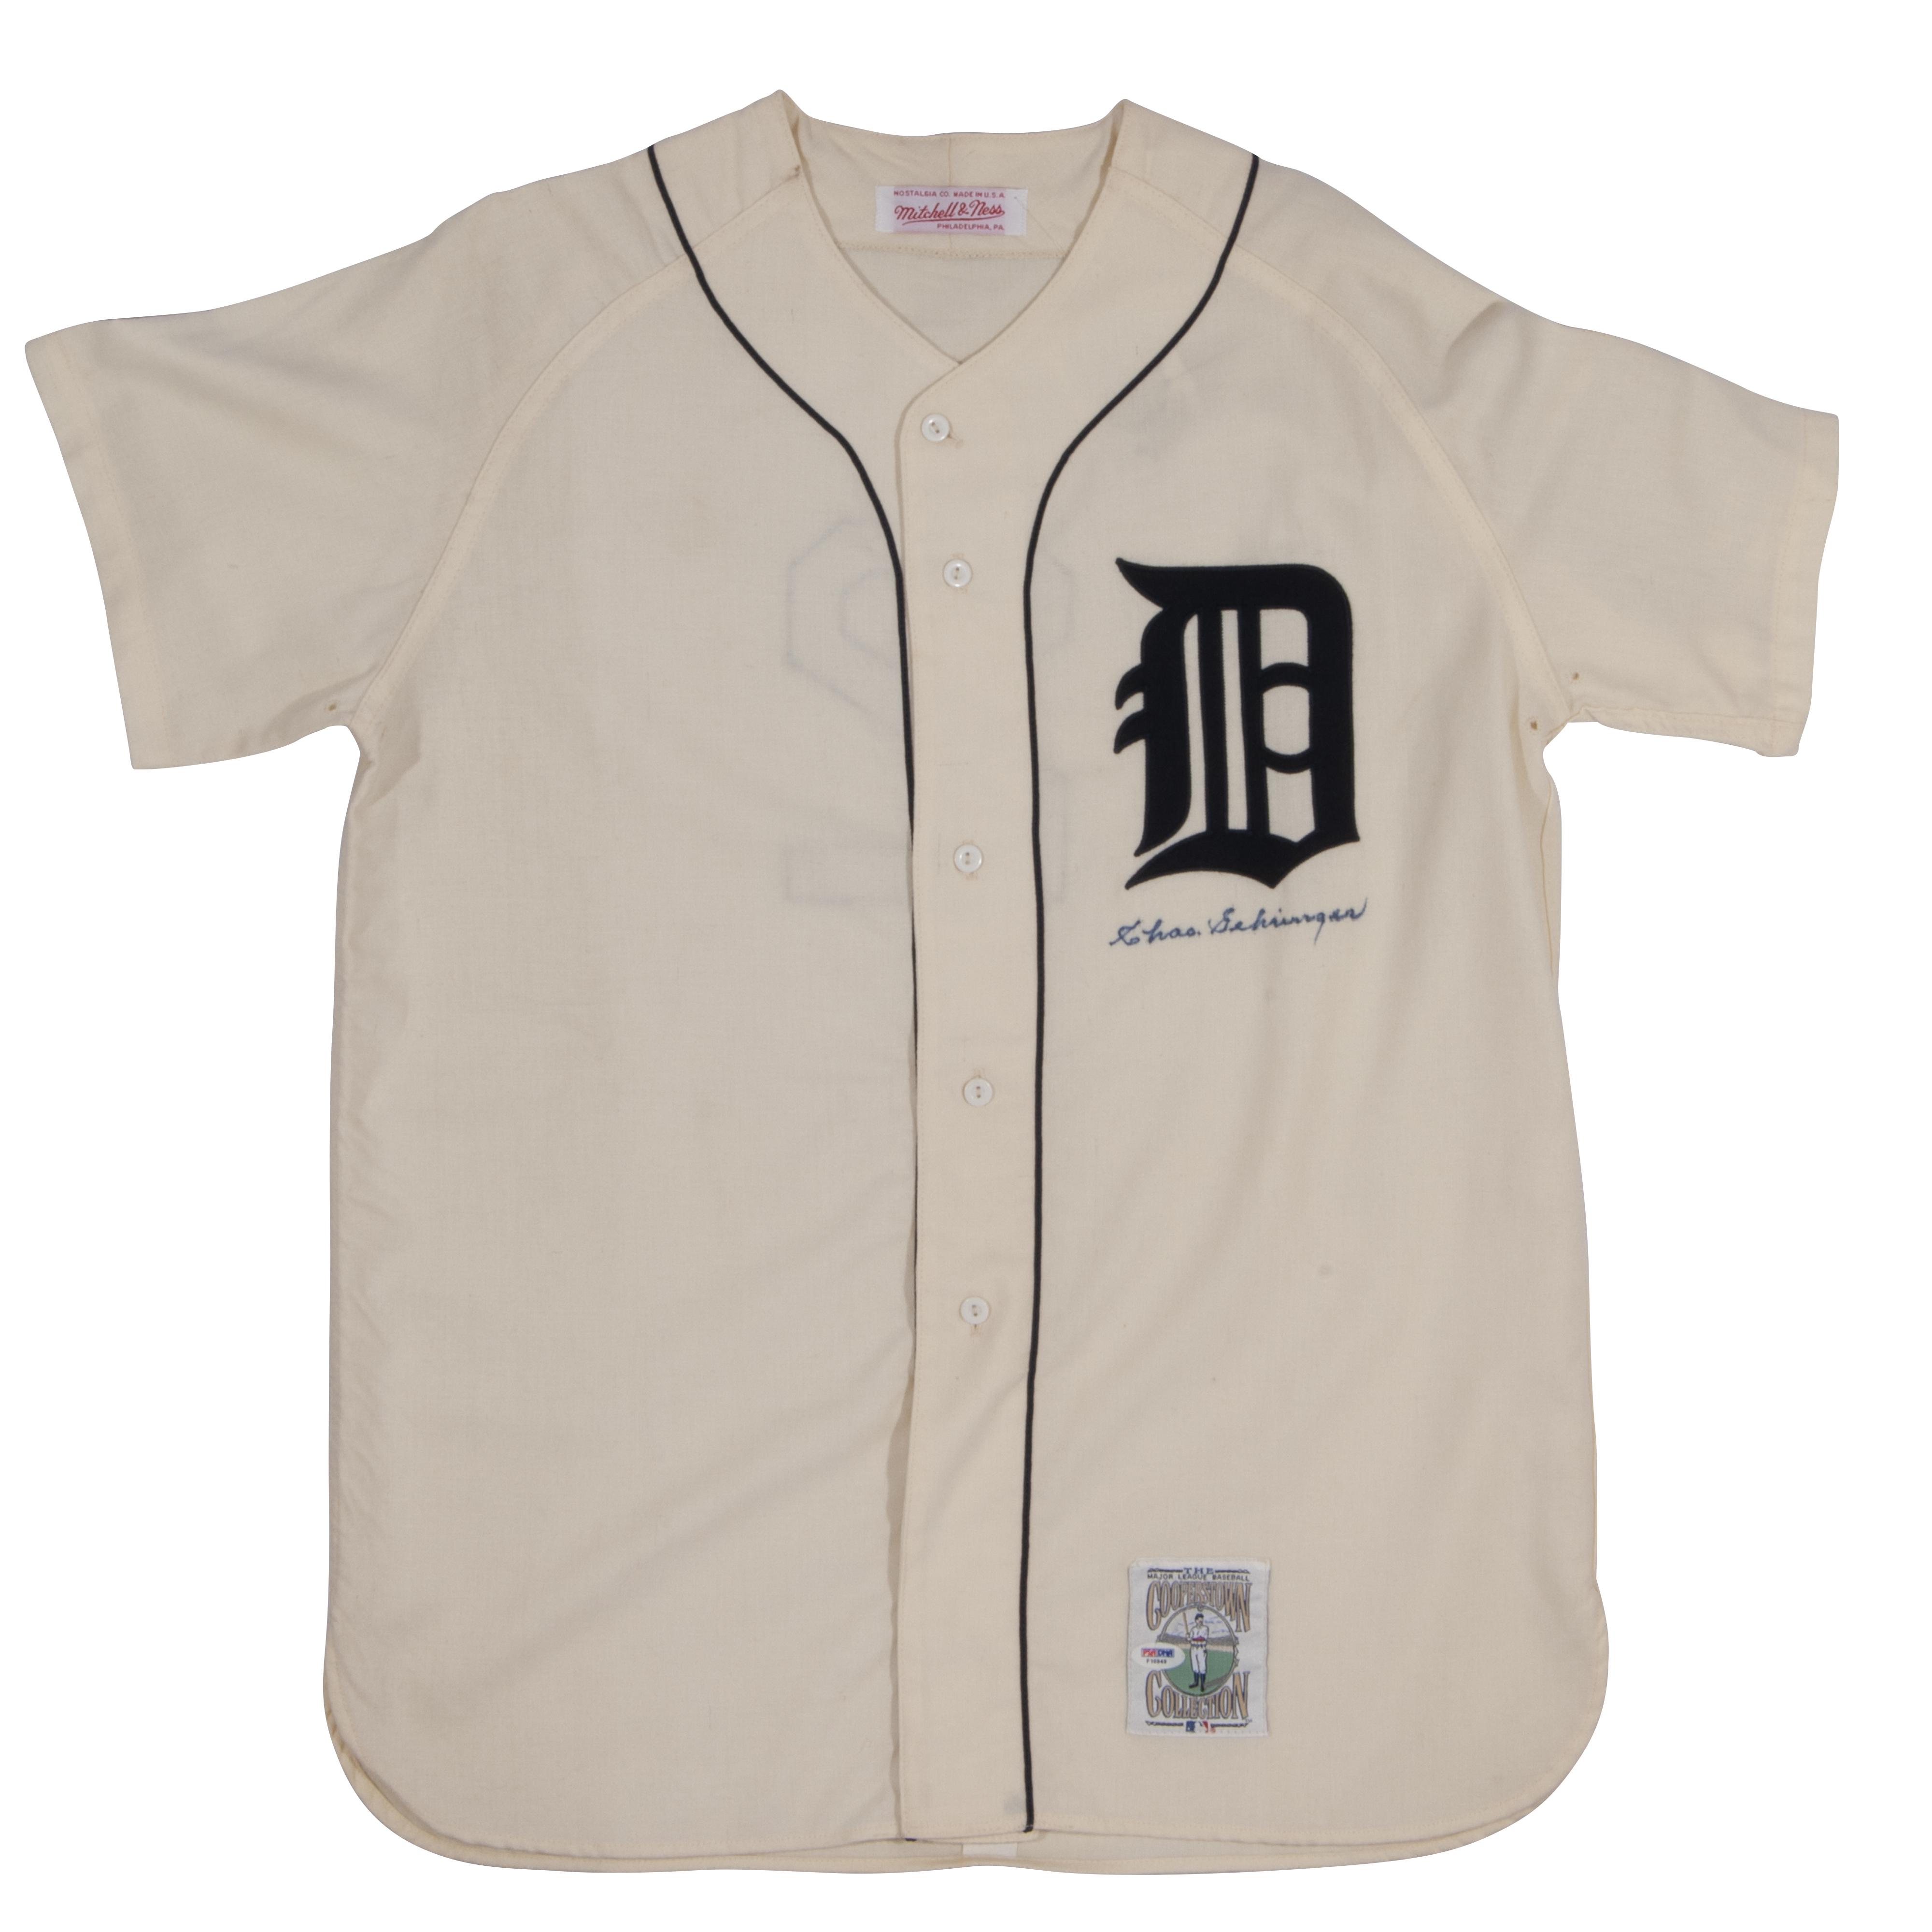 Mitchell and Ness Authentic Detroit Tigers Jersey for Sale in